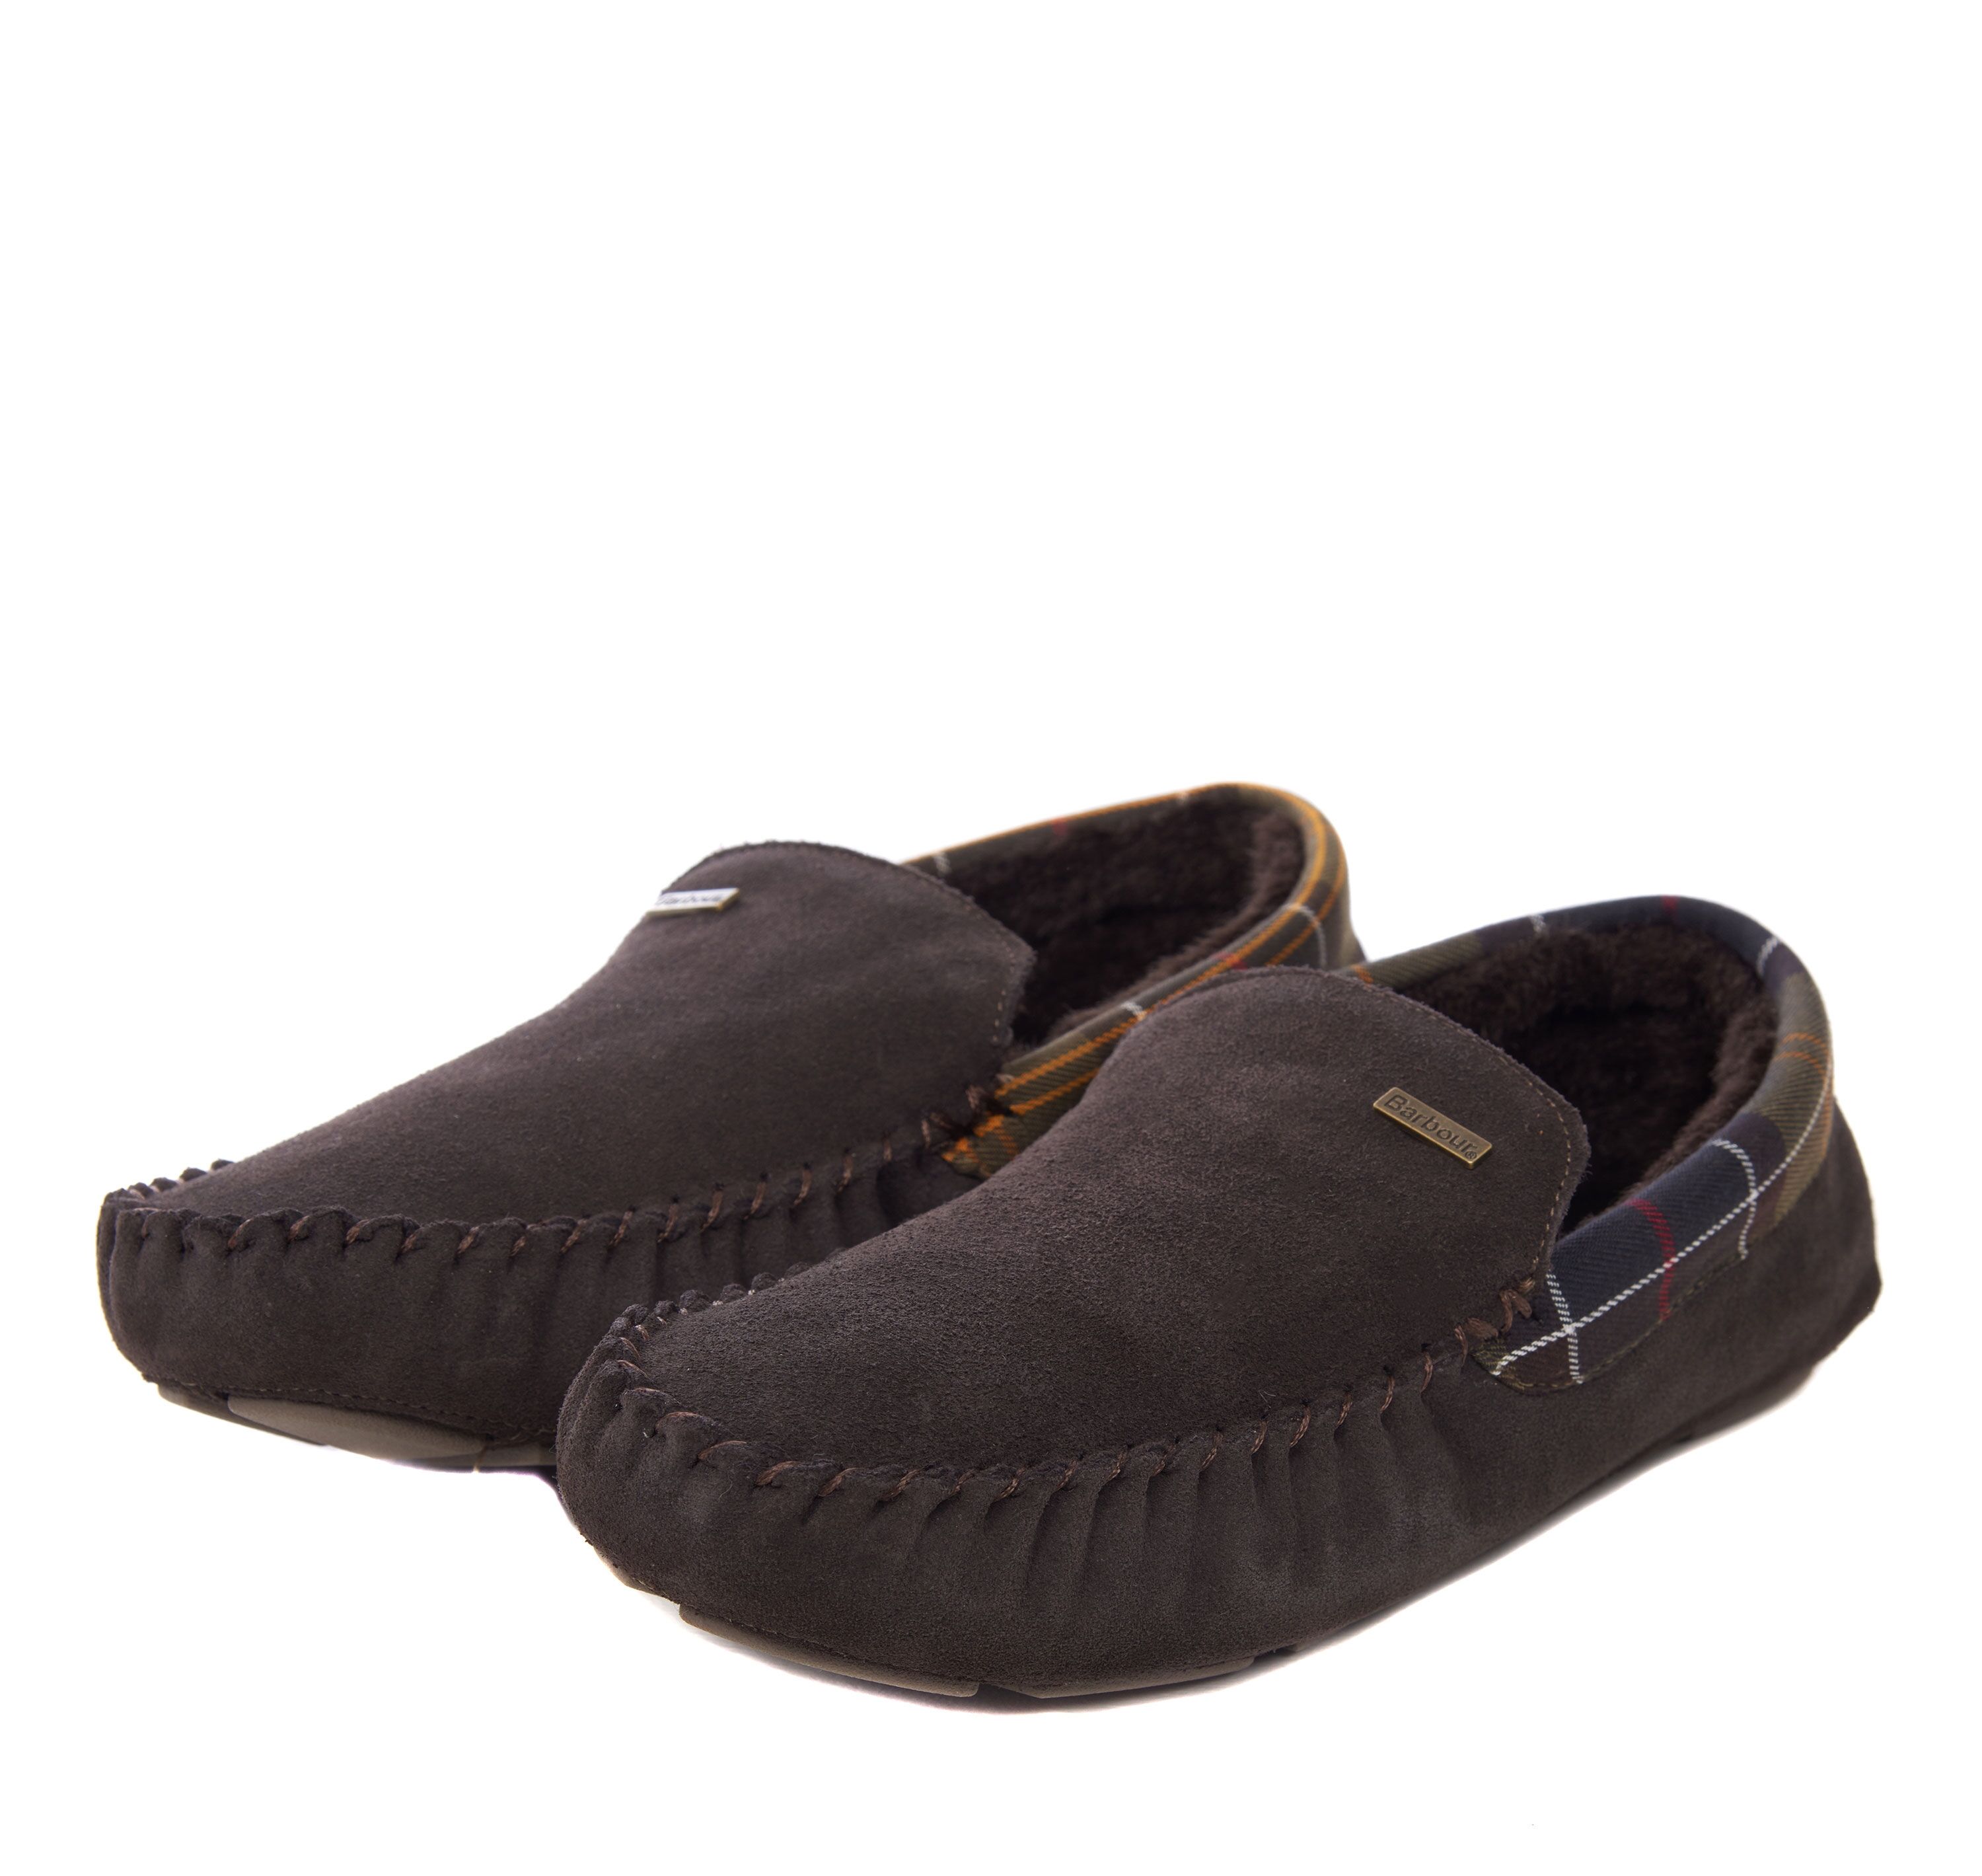 barbour leather slippers